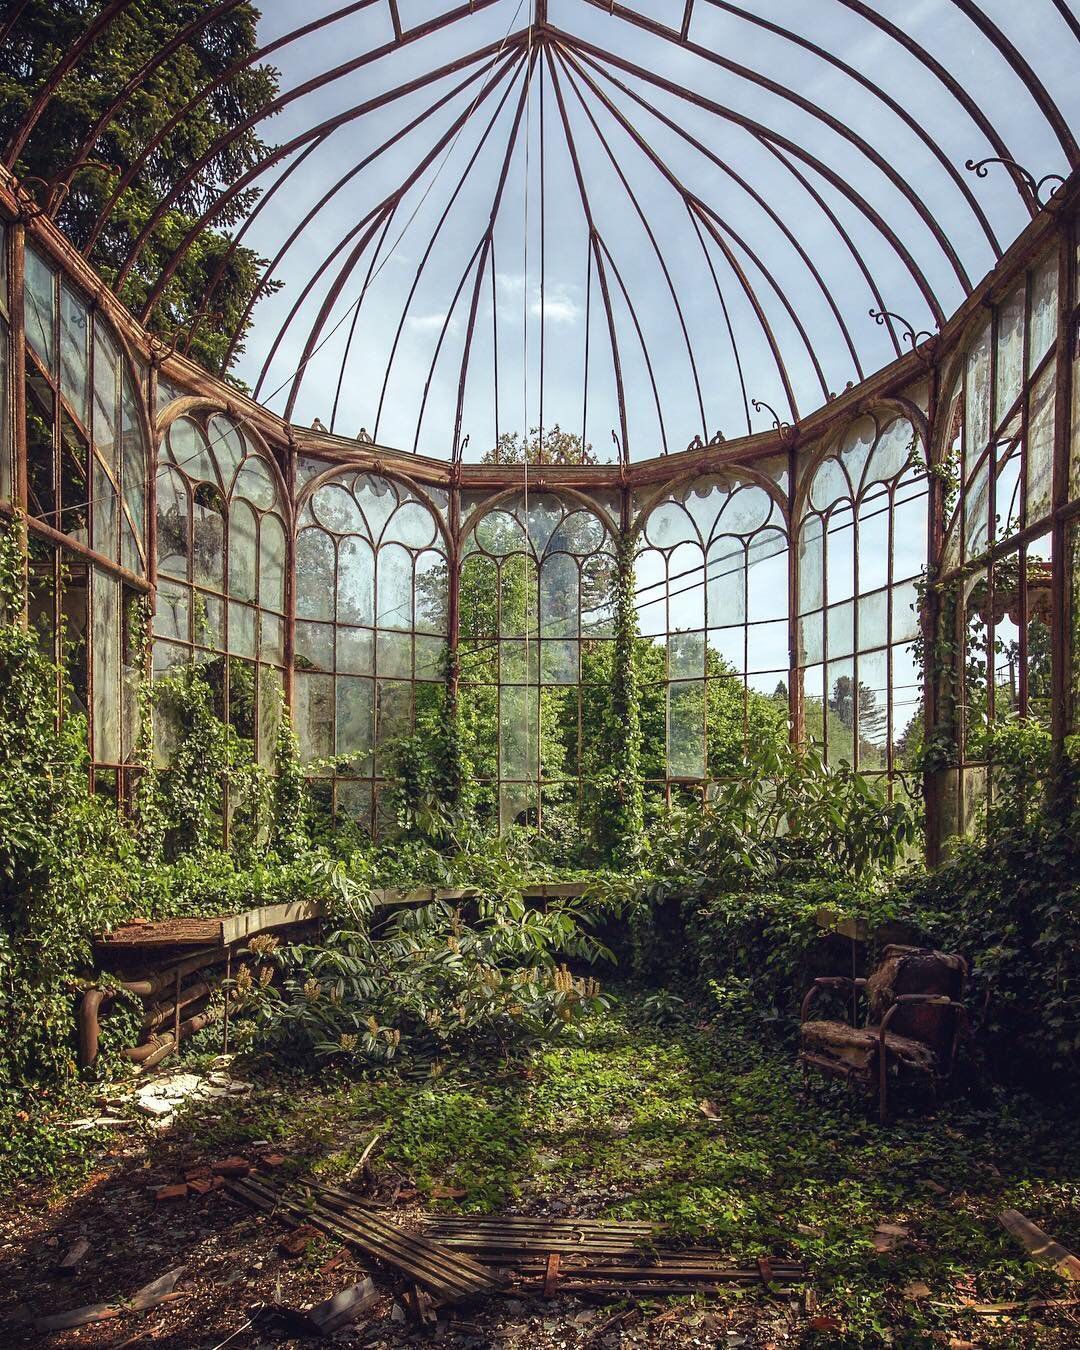 mynocturnality:
“ Abandoned Conservatory by Mathias Mahling.
”
Imagine sitting here doing some light reading under the early morning sunrise